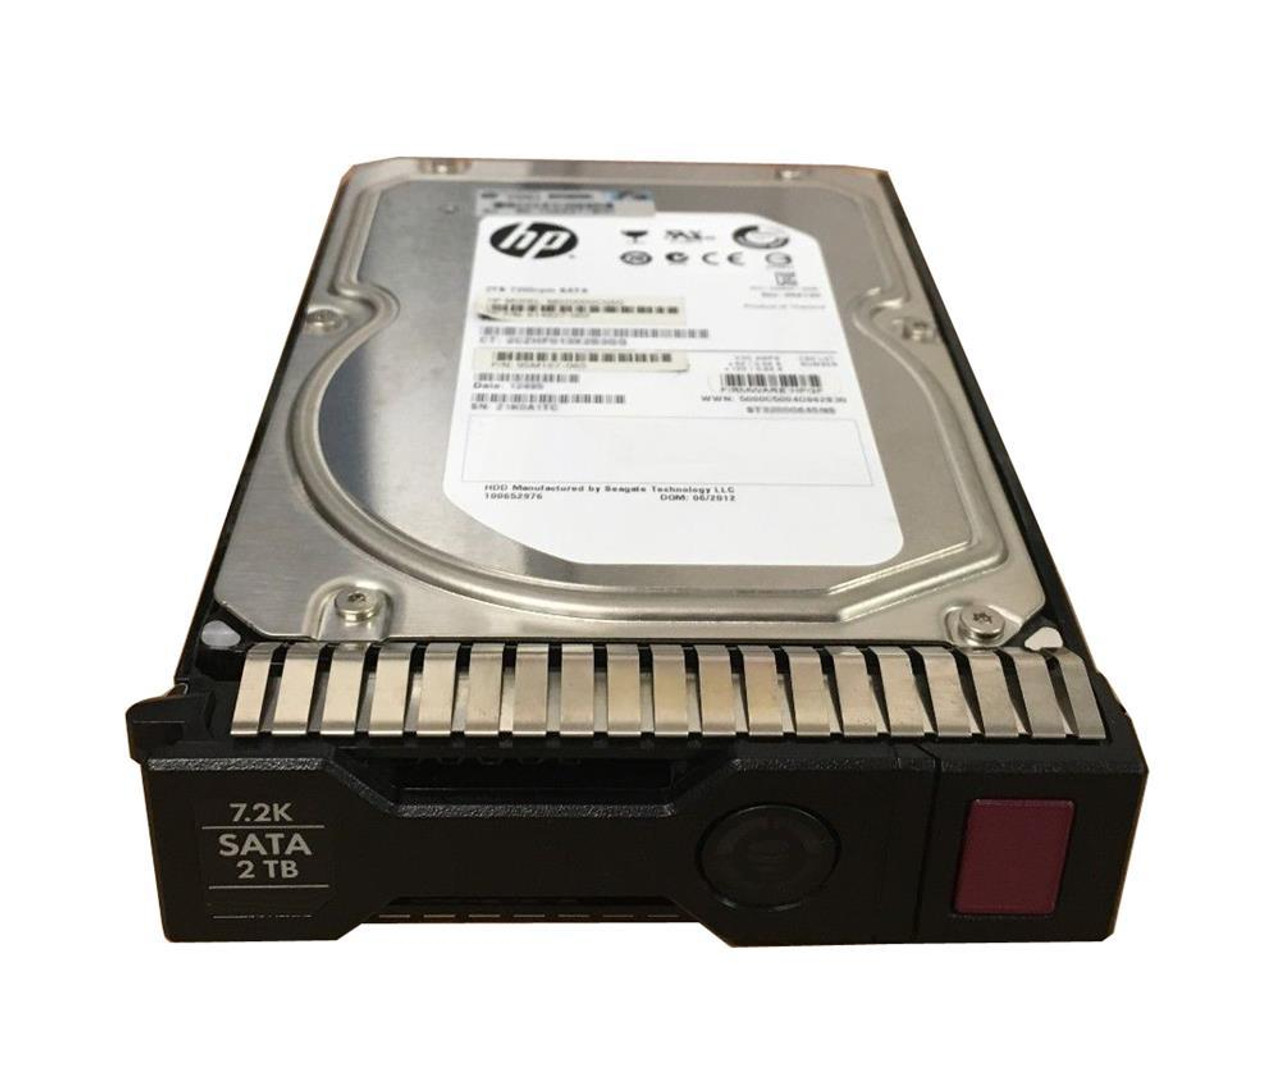 872295-001 HPE 2TB 7200RPM SATA 6Gbps 3.5-inch Internal Hard Drive with Smart Carrier